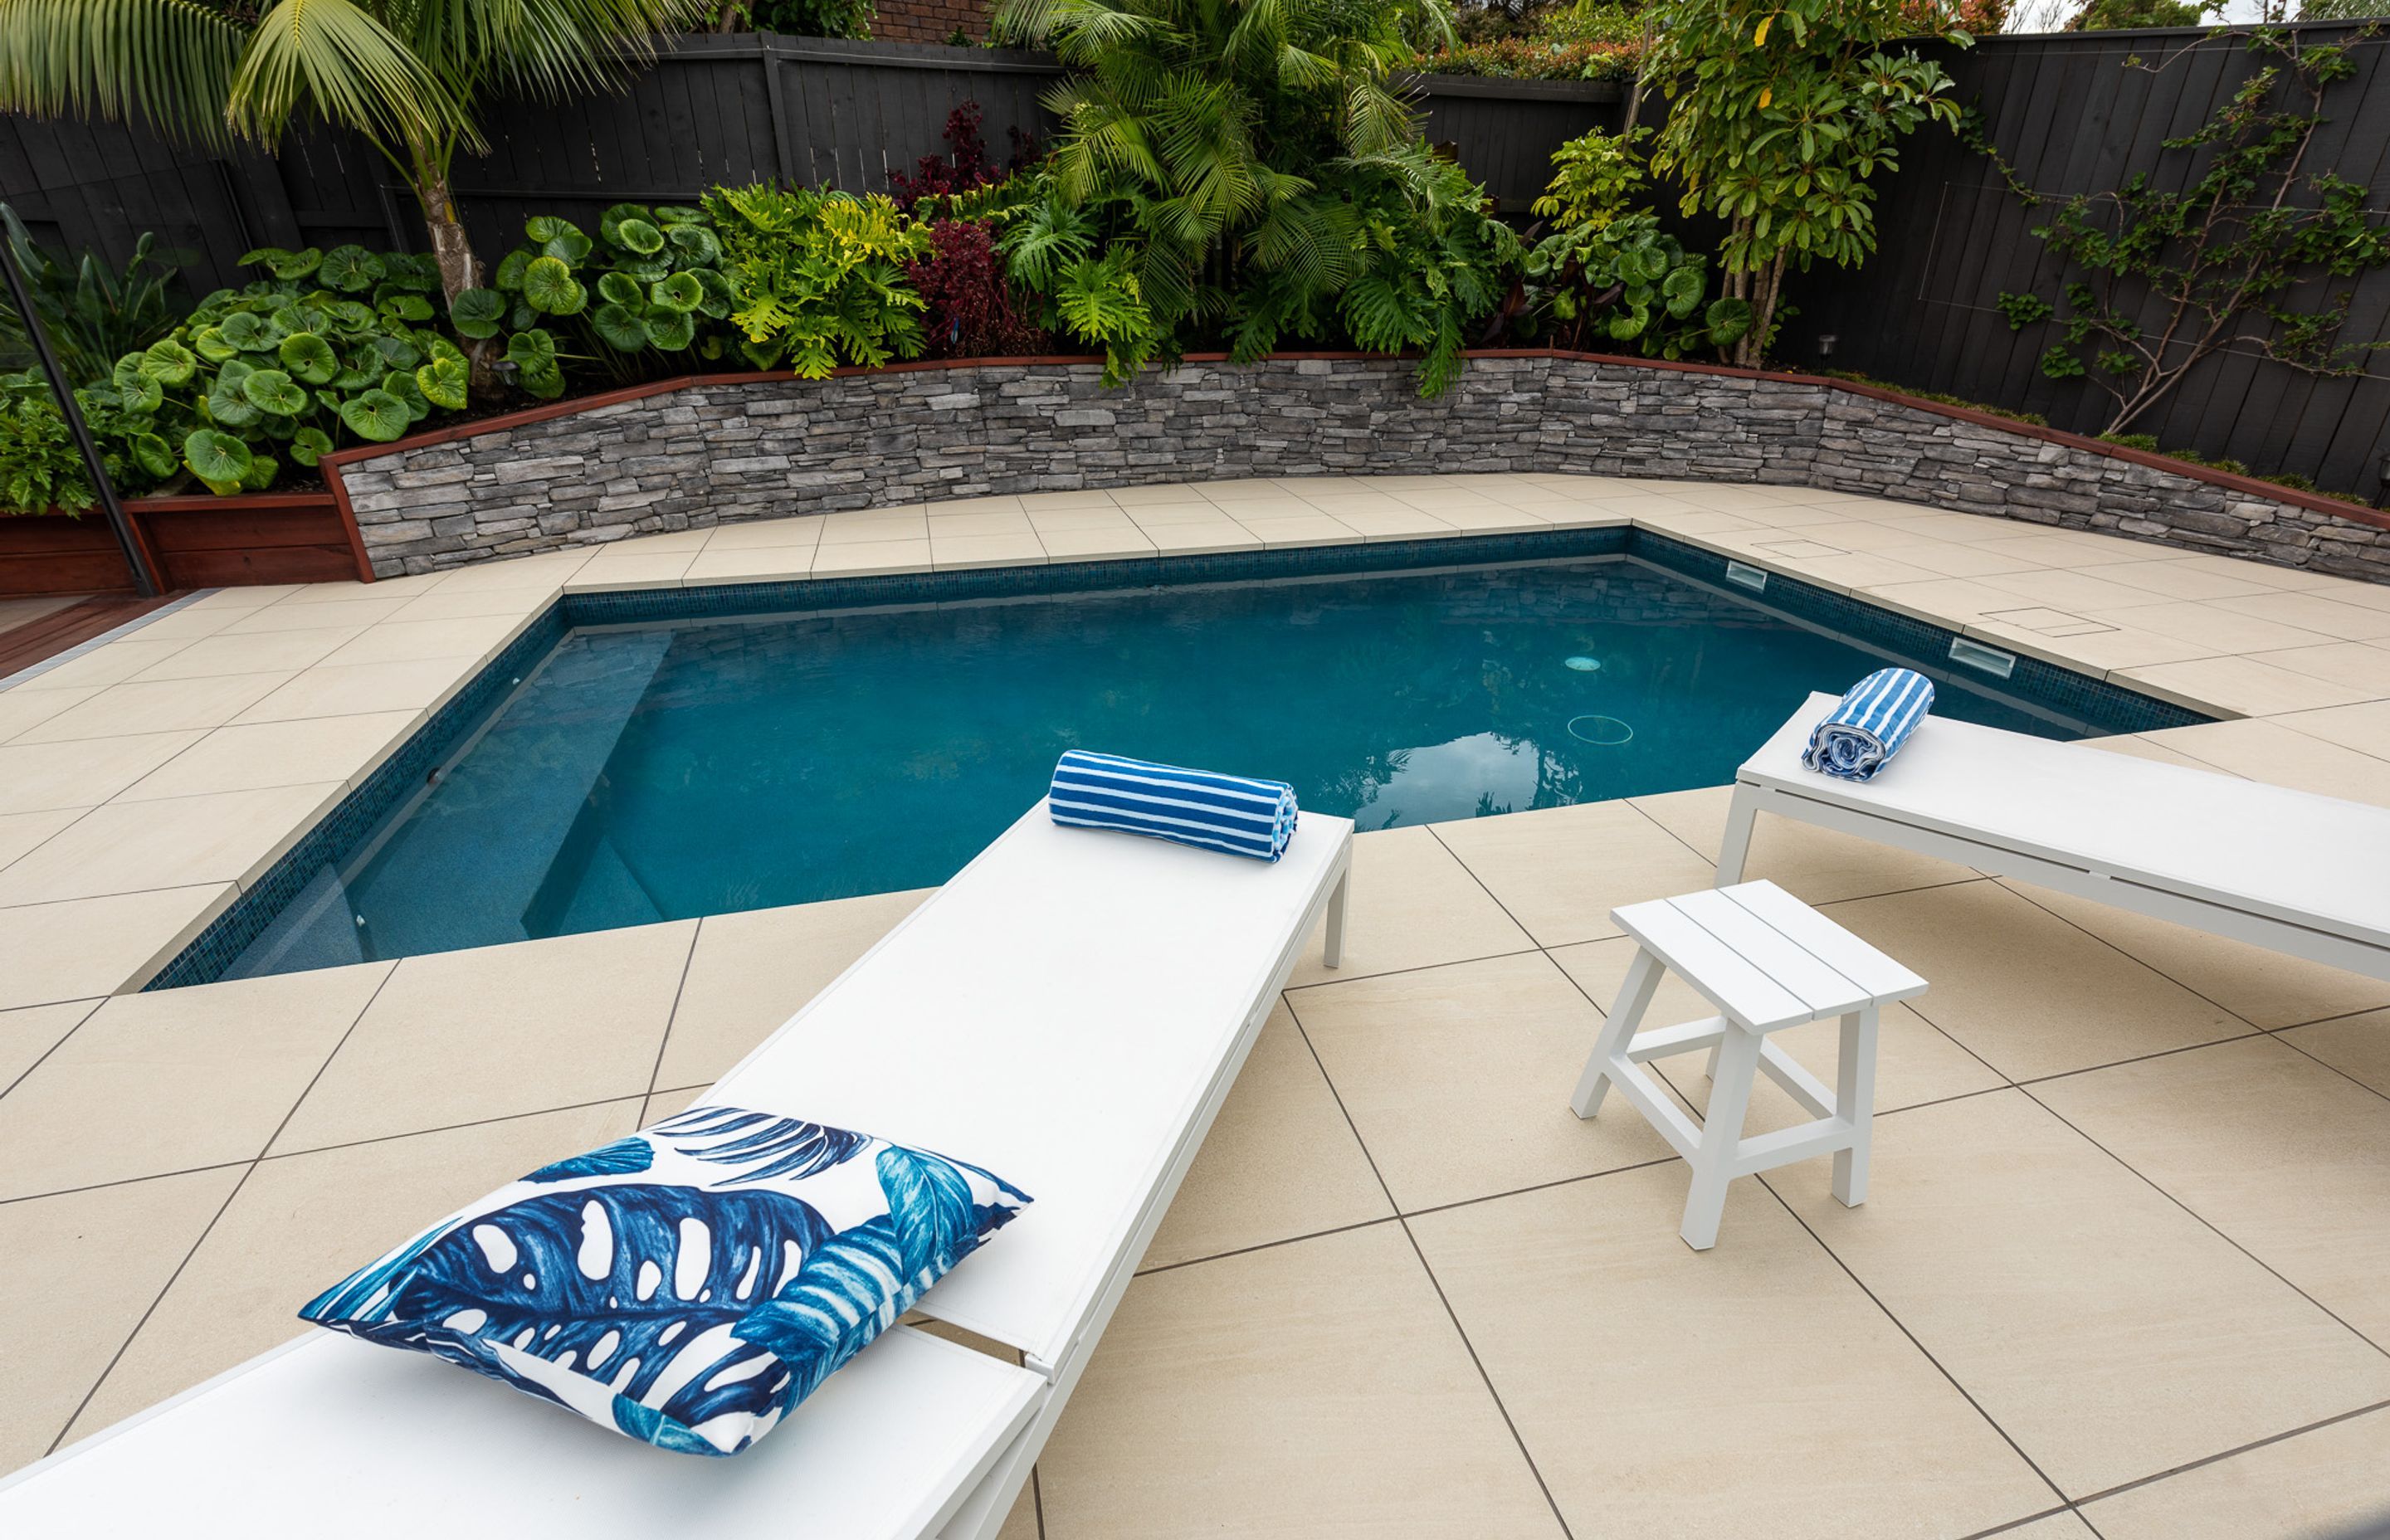 The newly renovated pool area complements the existing garden area well.